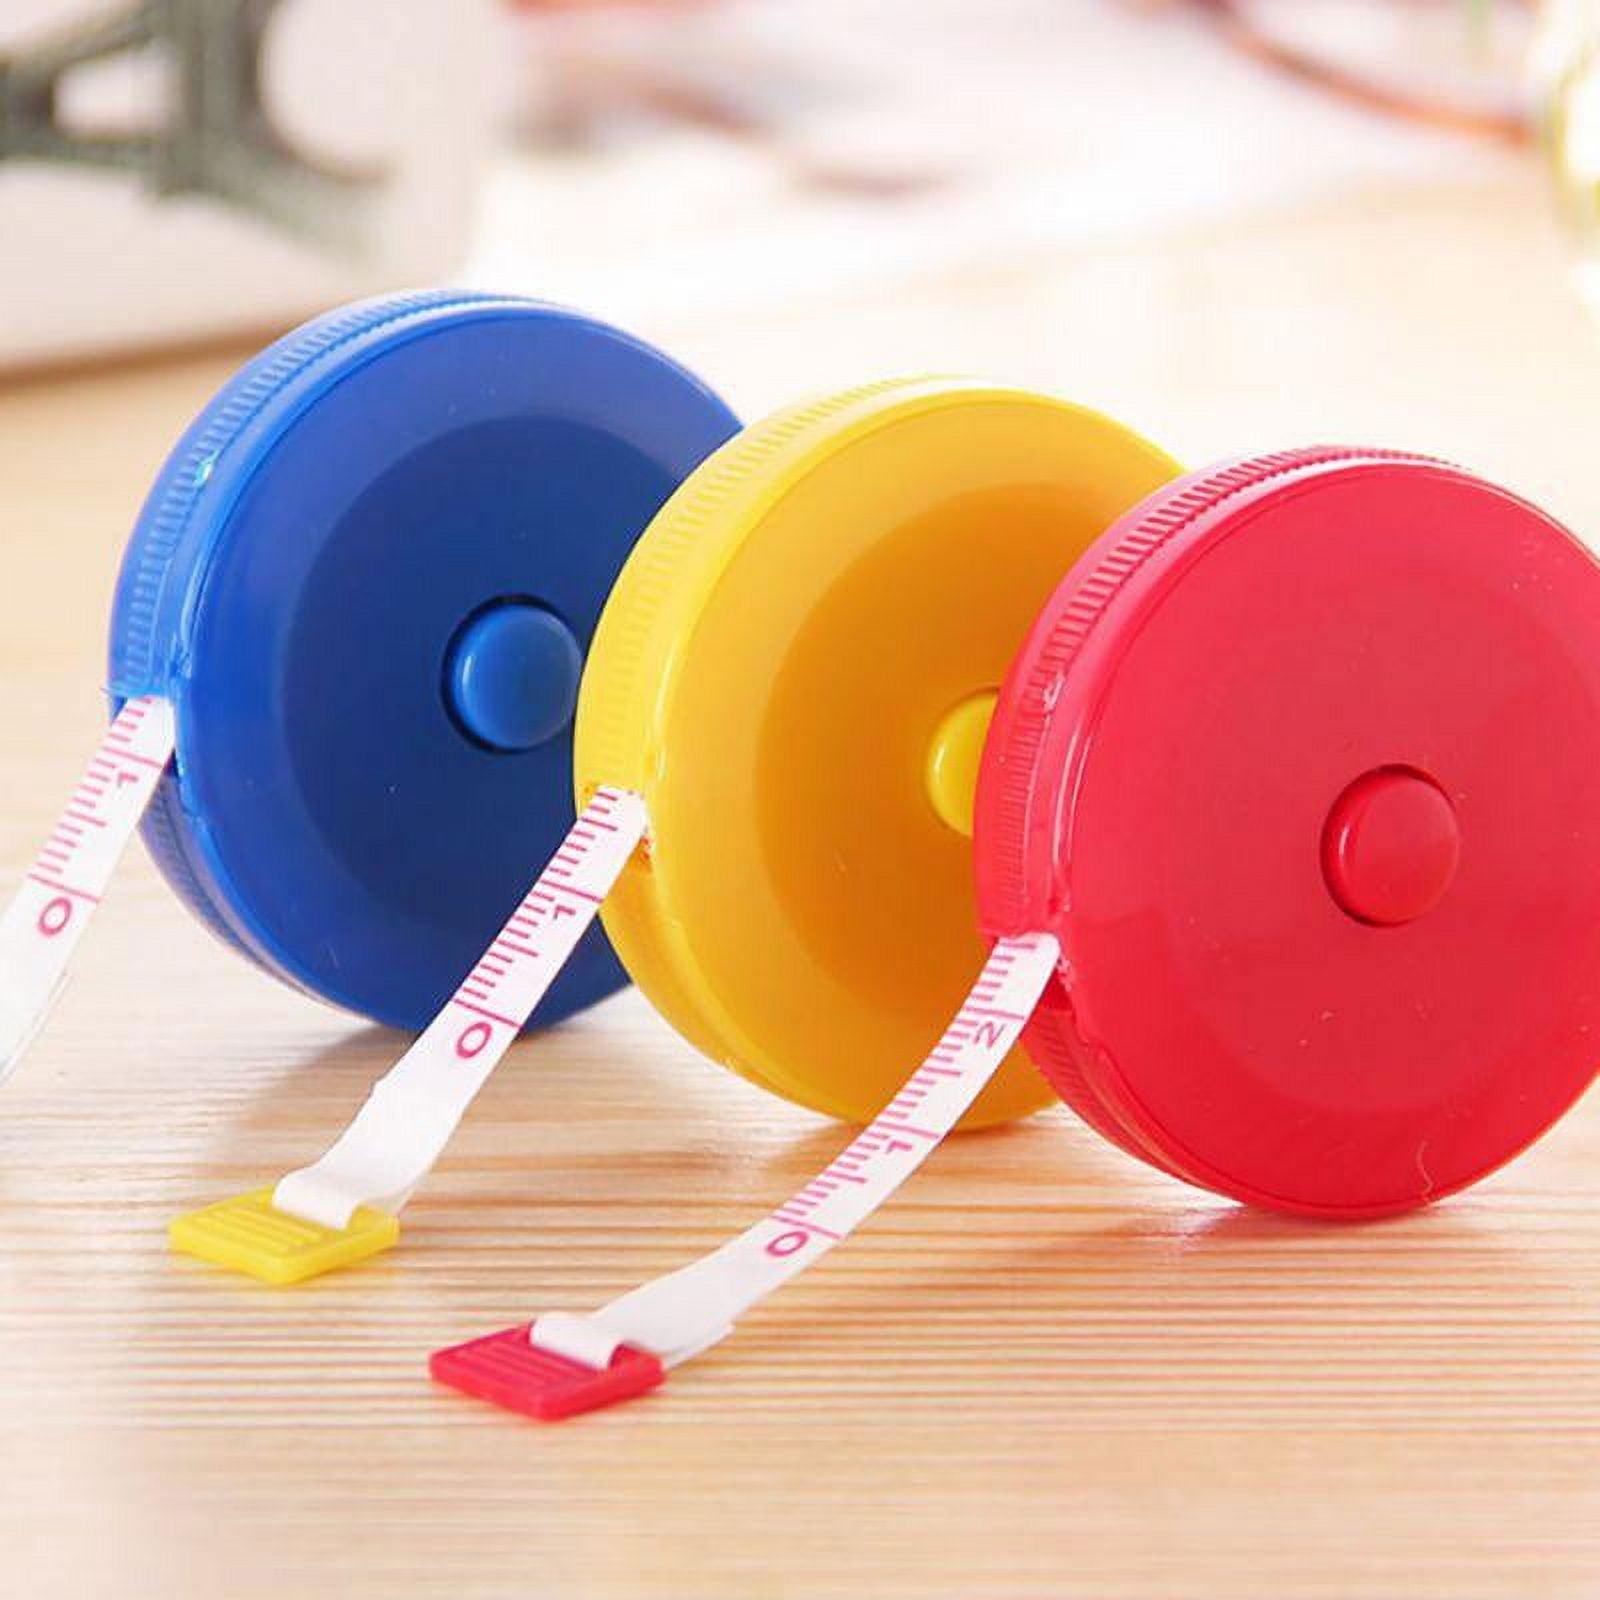 Frcolor 1pc Learning Resources Tapeline Long Tape Measure inch Centimeter Tape for Kids, Size: 15x12x2CM